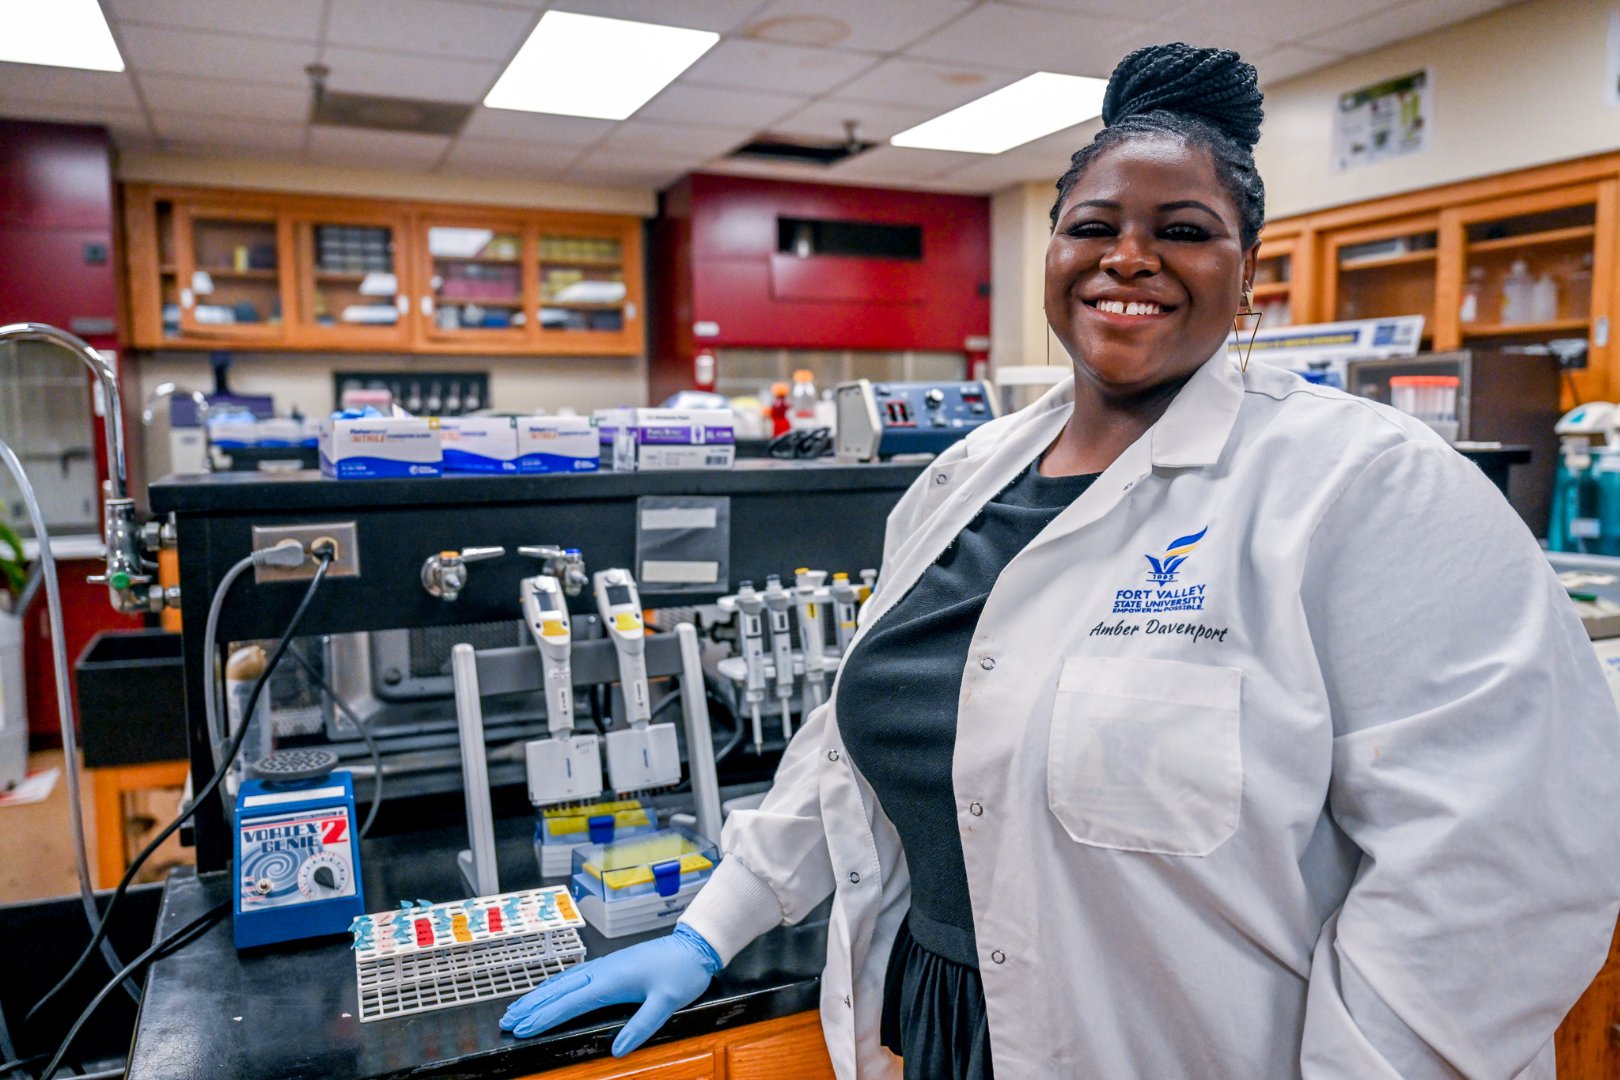 Biotechnology graduate student Amber Davenport’s love for science is centered on helping people.